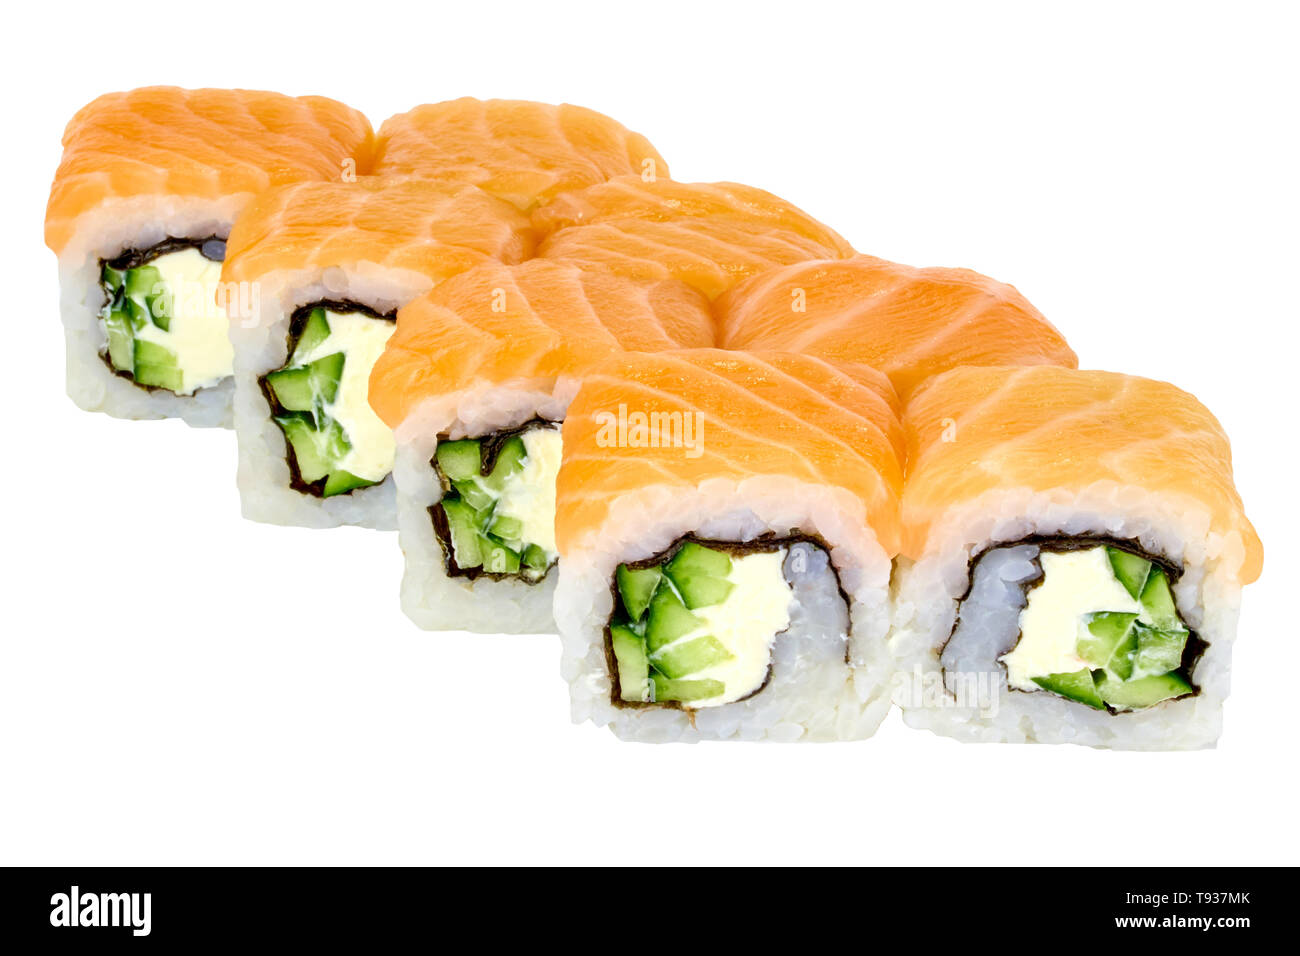 Sushi roll japanese food isolated on white background Philadelphia sushi roll with salmon and cucumber close-up Stock Photo